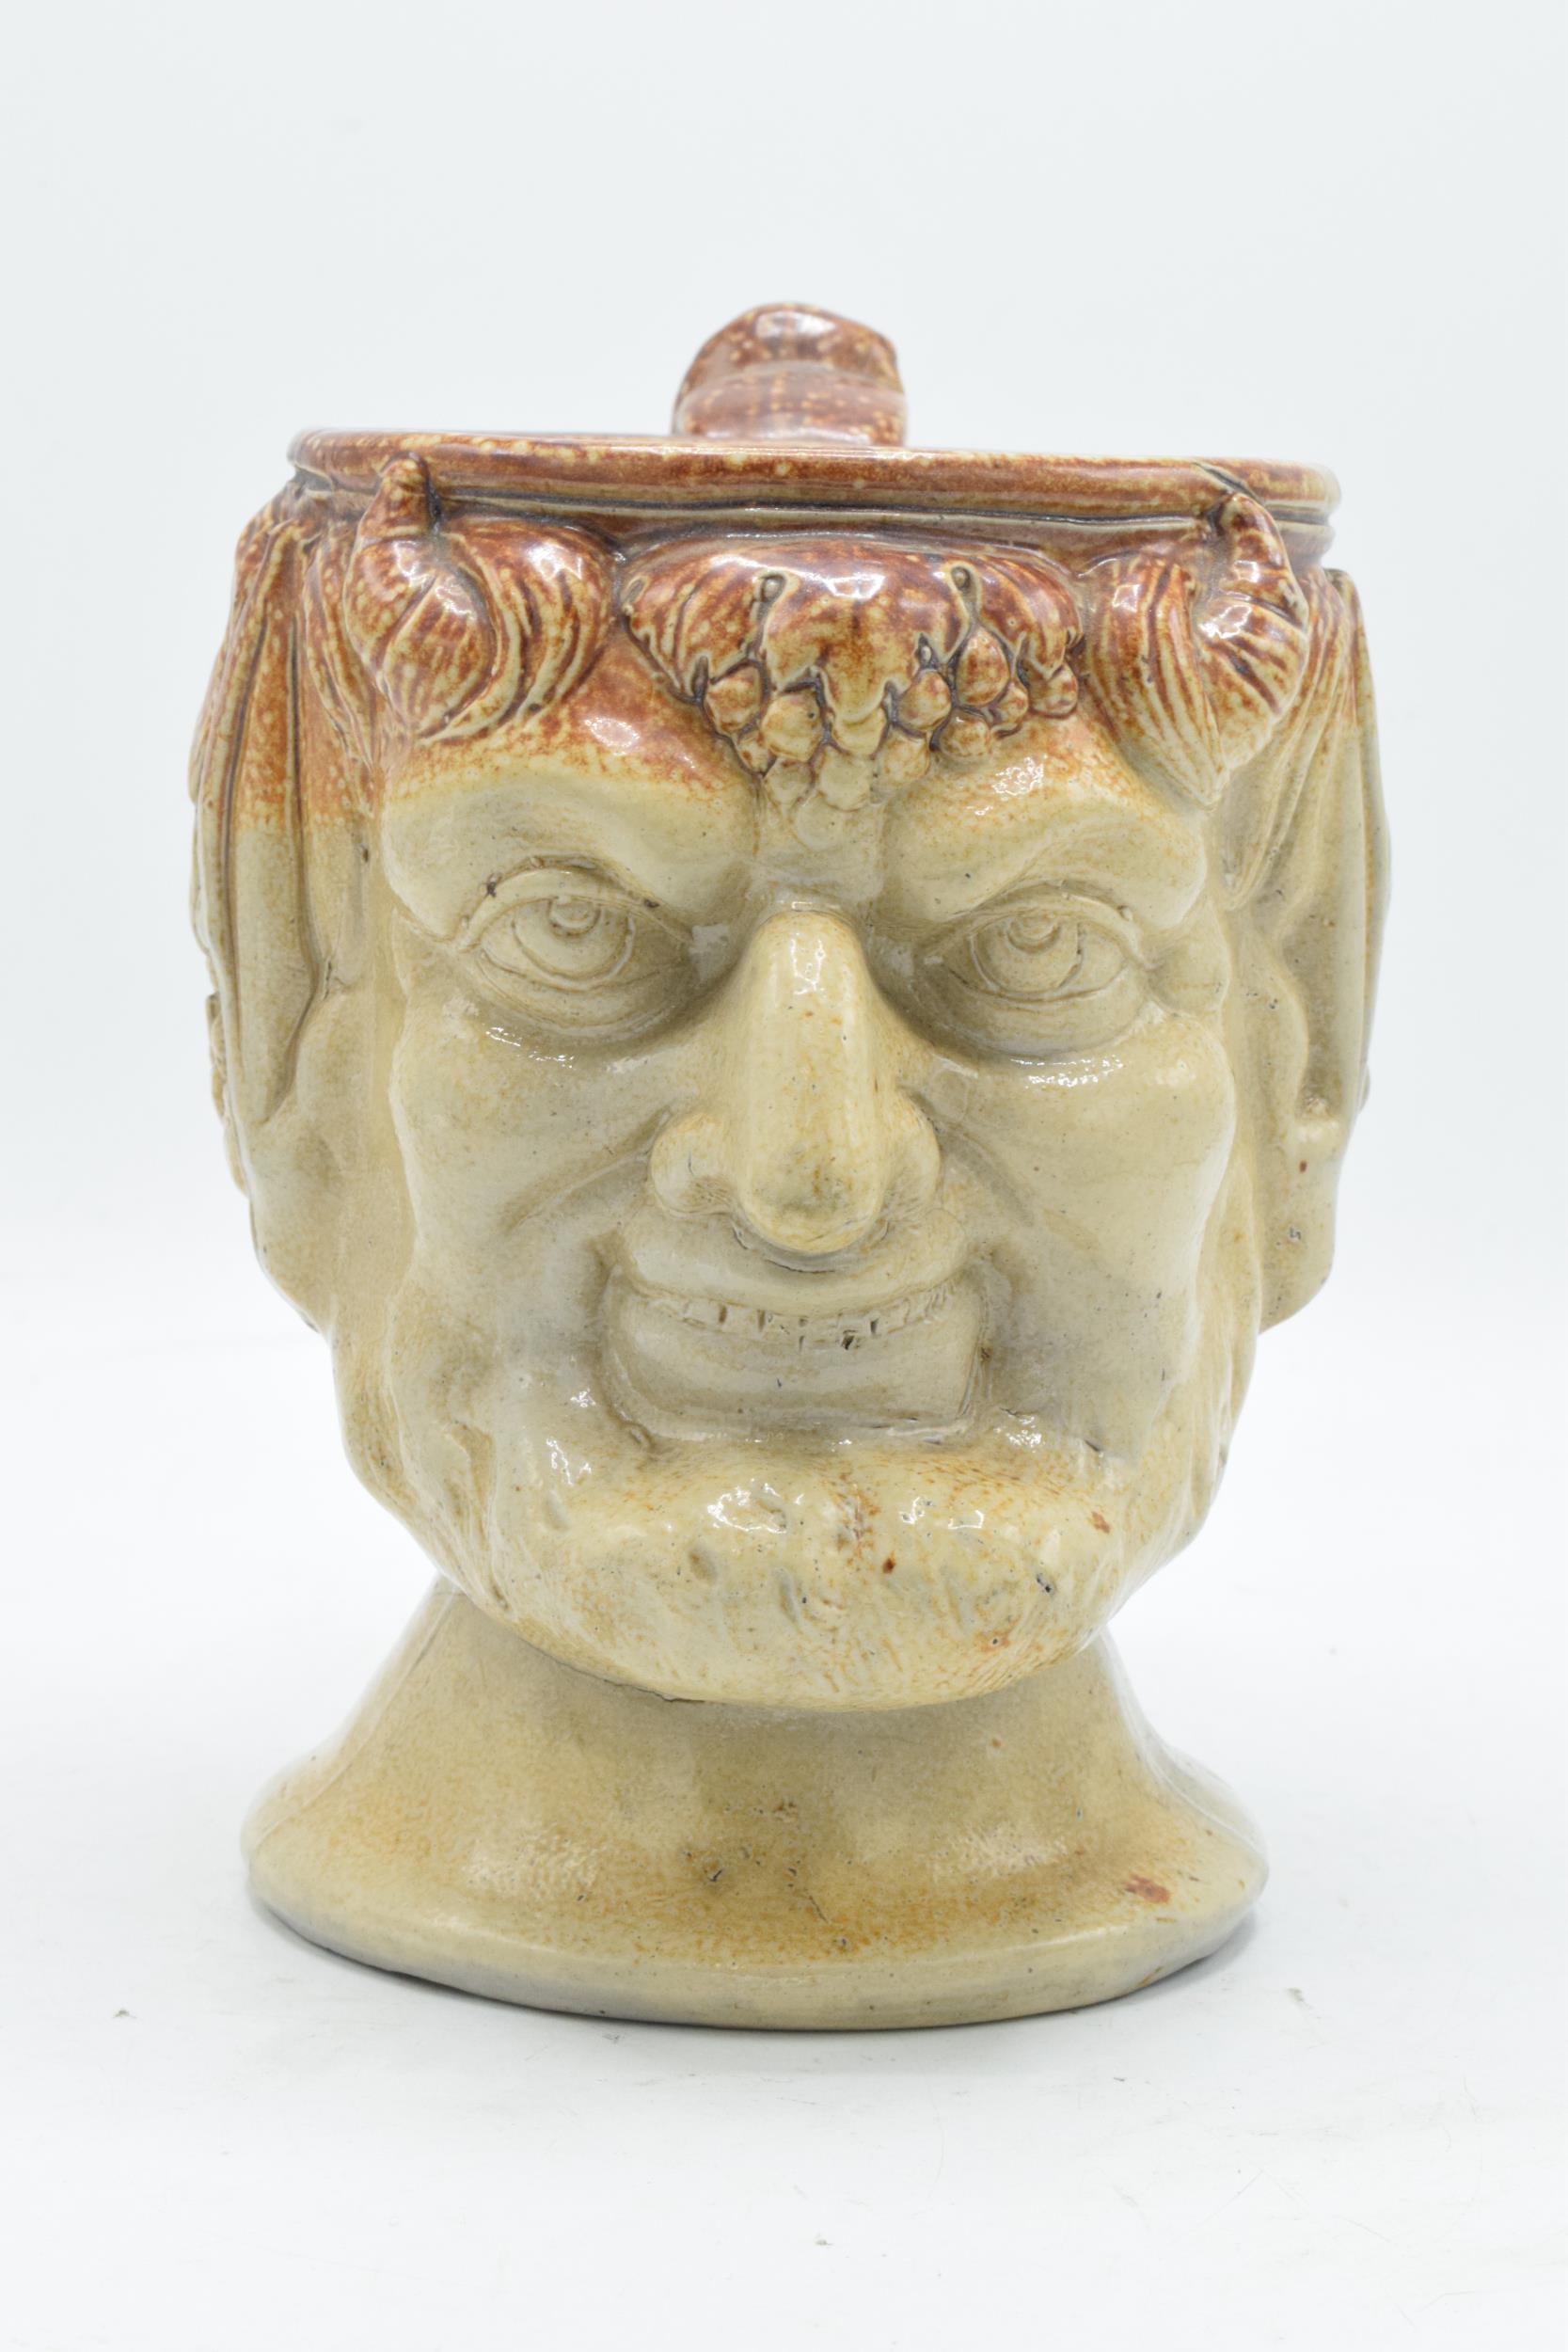 A 19th century stoneware character jug in the form of Bacchus. 19cm tall. Generally in good